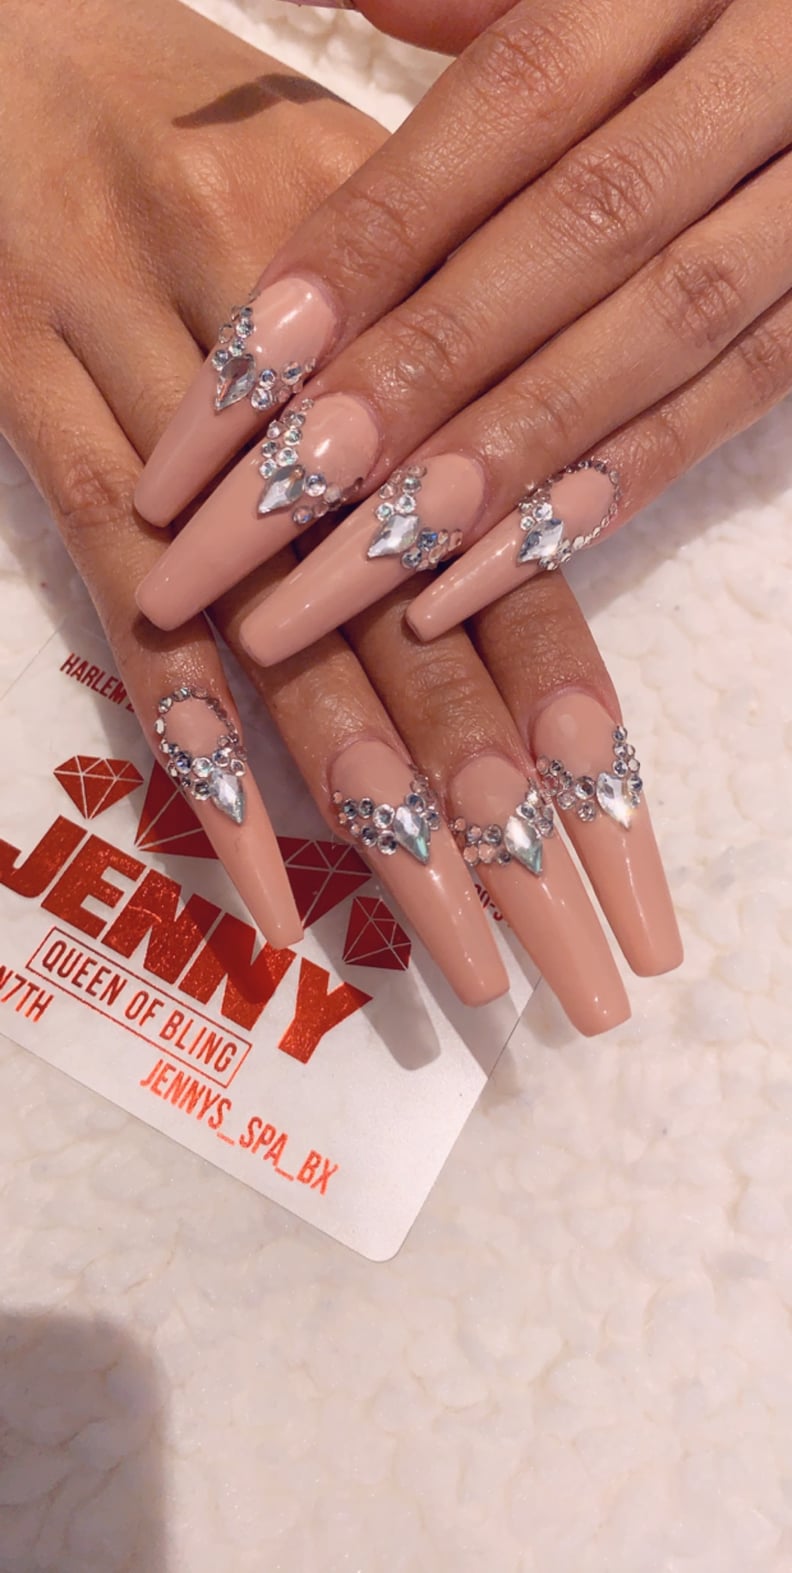 Cardi B's Nails For the Grammys 2019